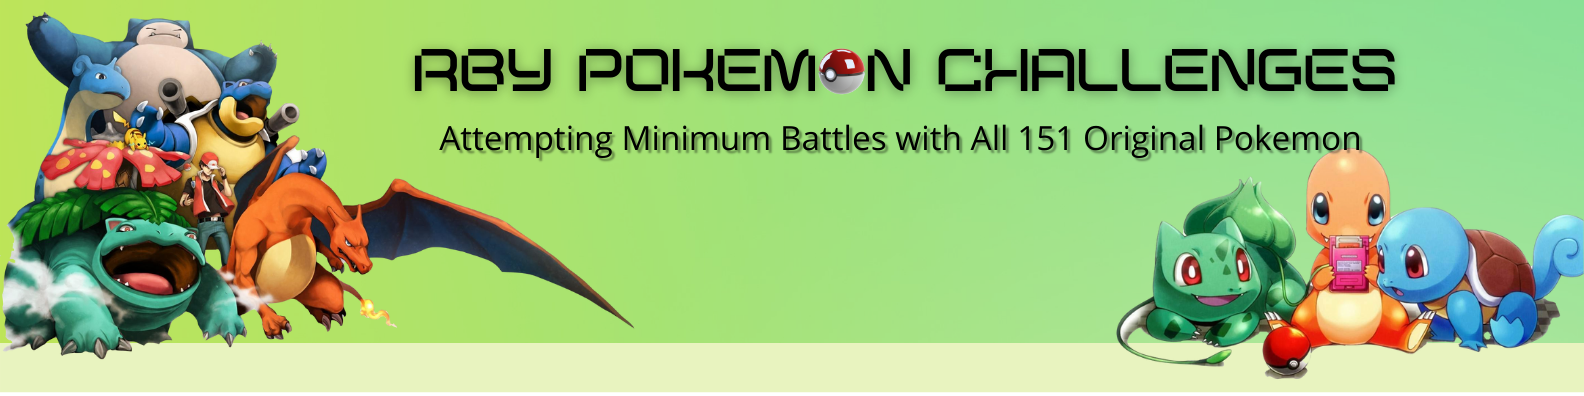 RBY Pokemon Challenges Banner